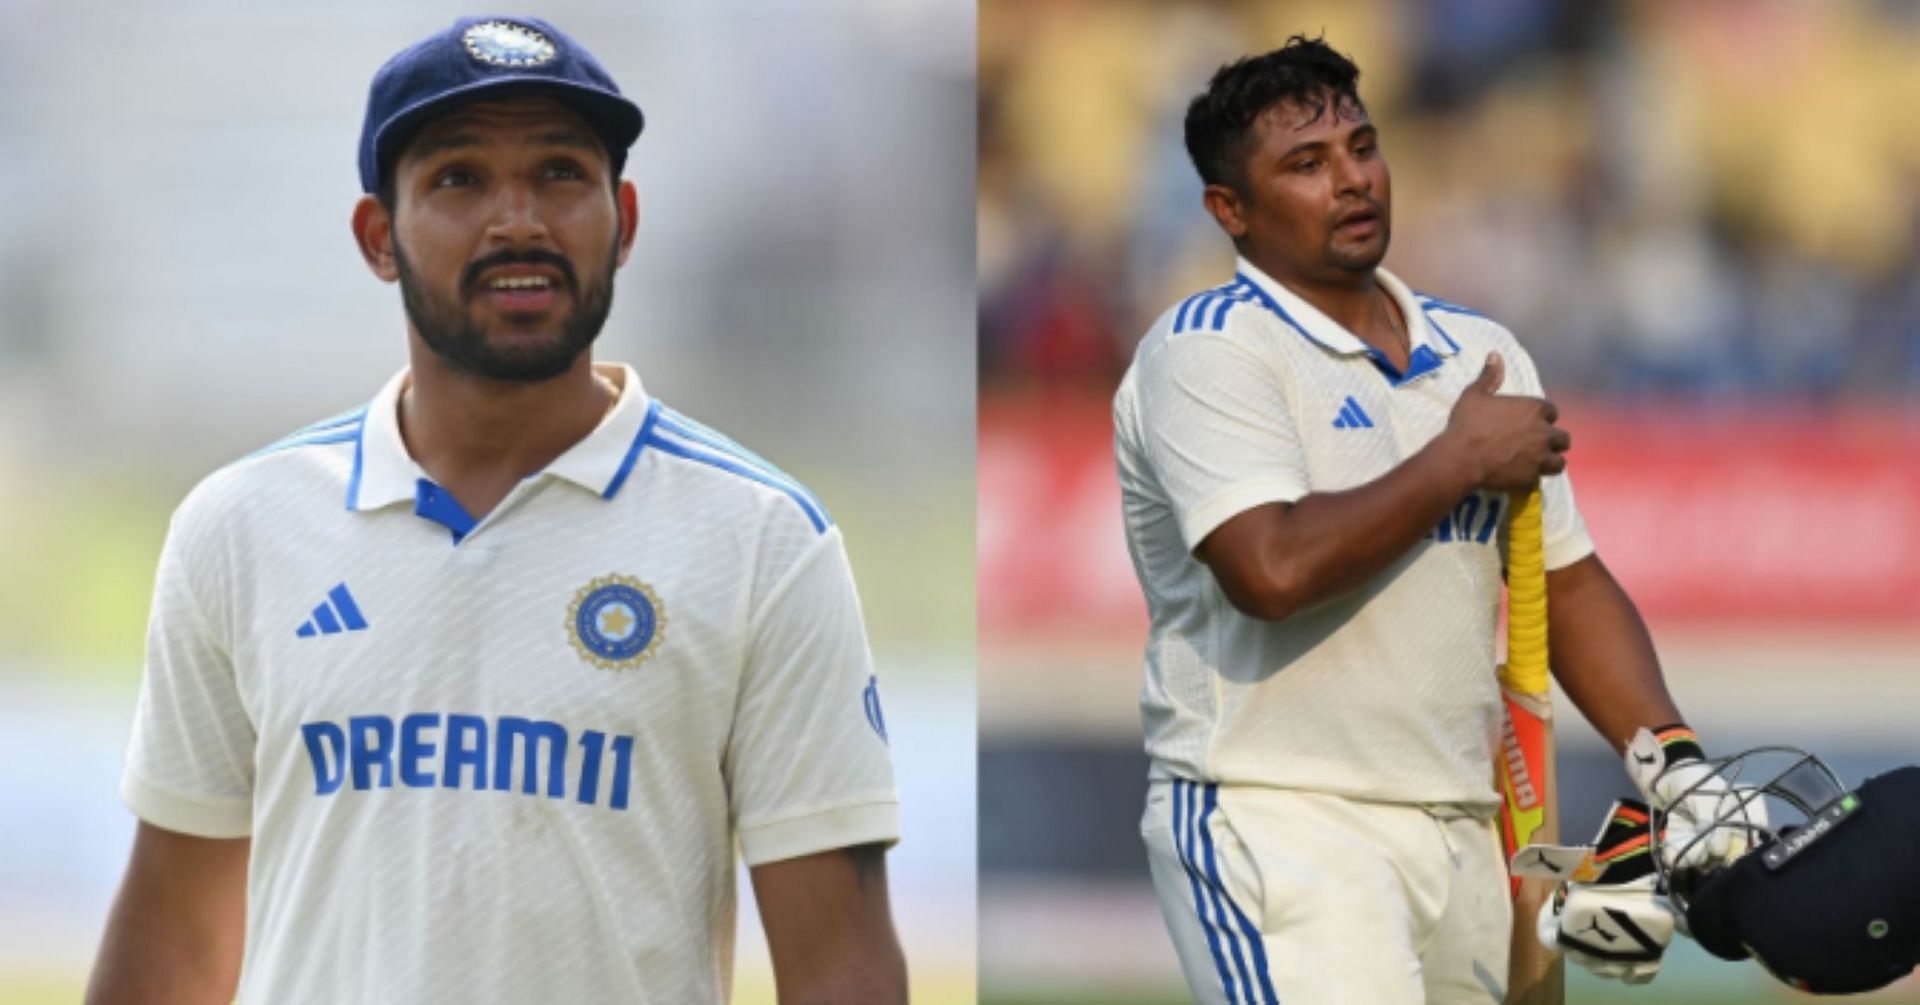 The duo helped India overcome the absence of regular starters